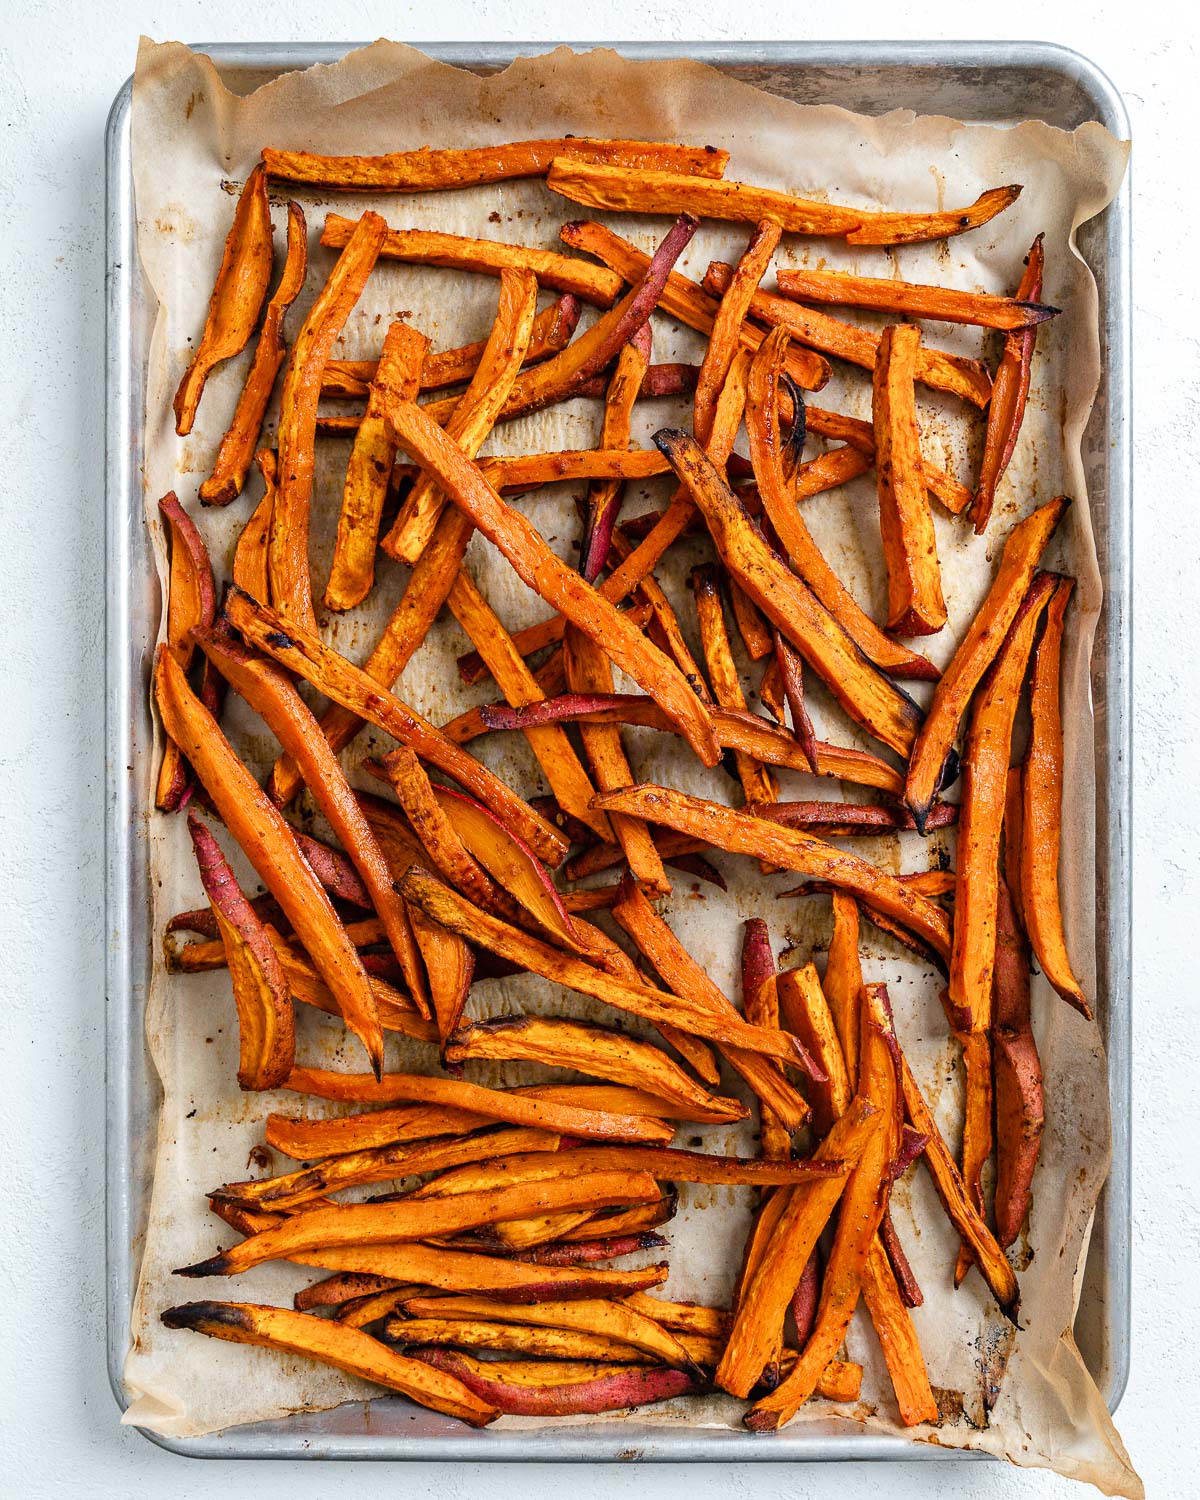 post cooked sweet potato fries in a baking tray